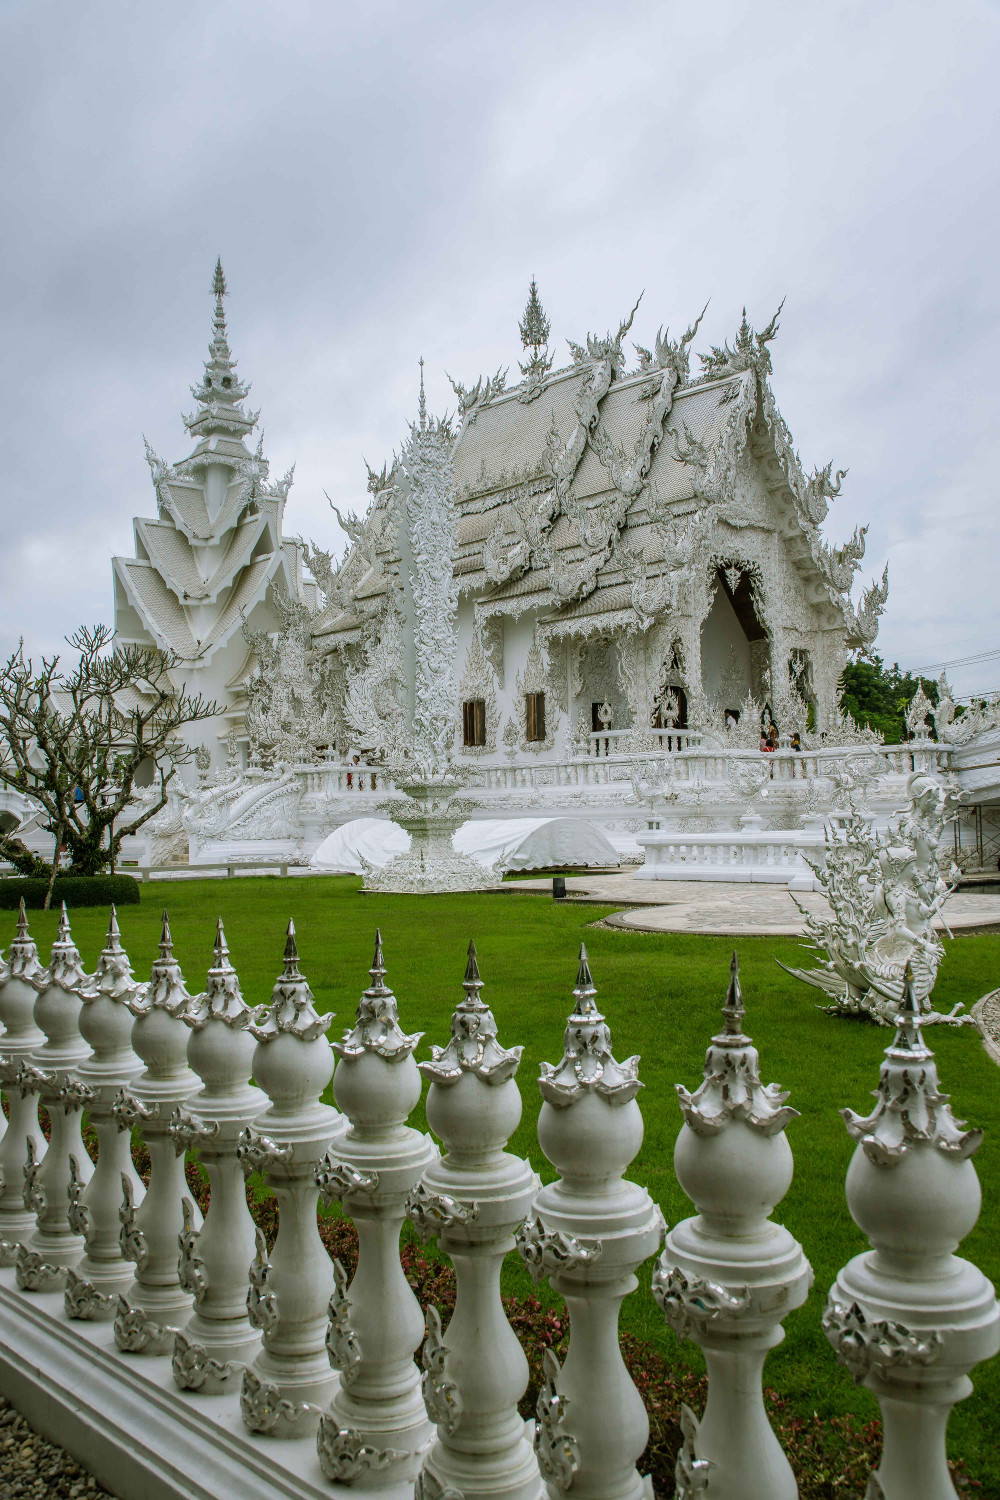 Wat Rong Khun also known as The White Temple in Chiang Rai